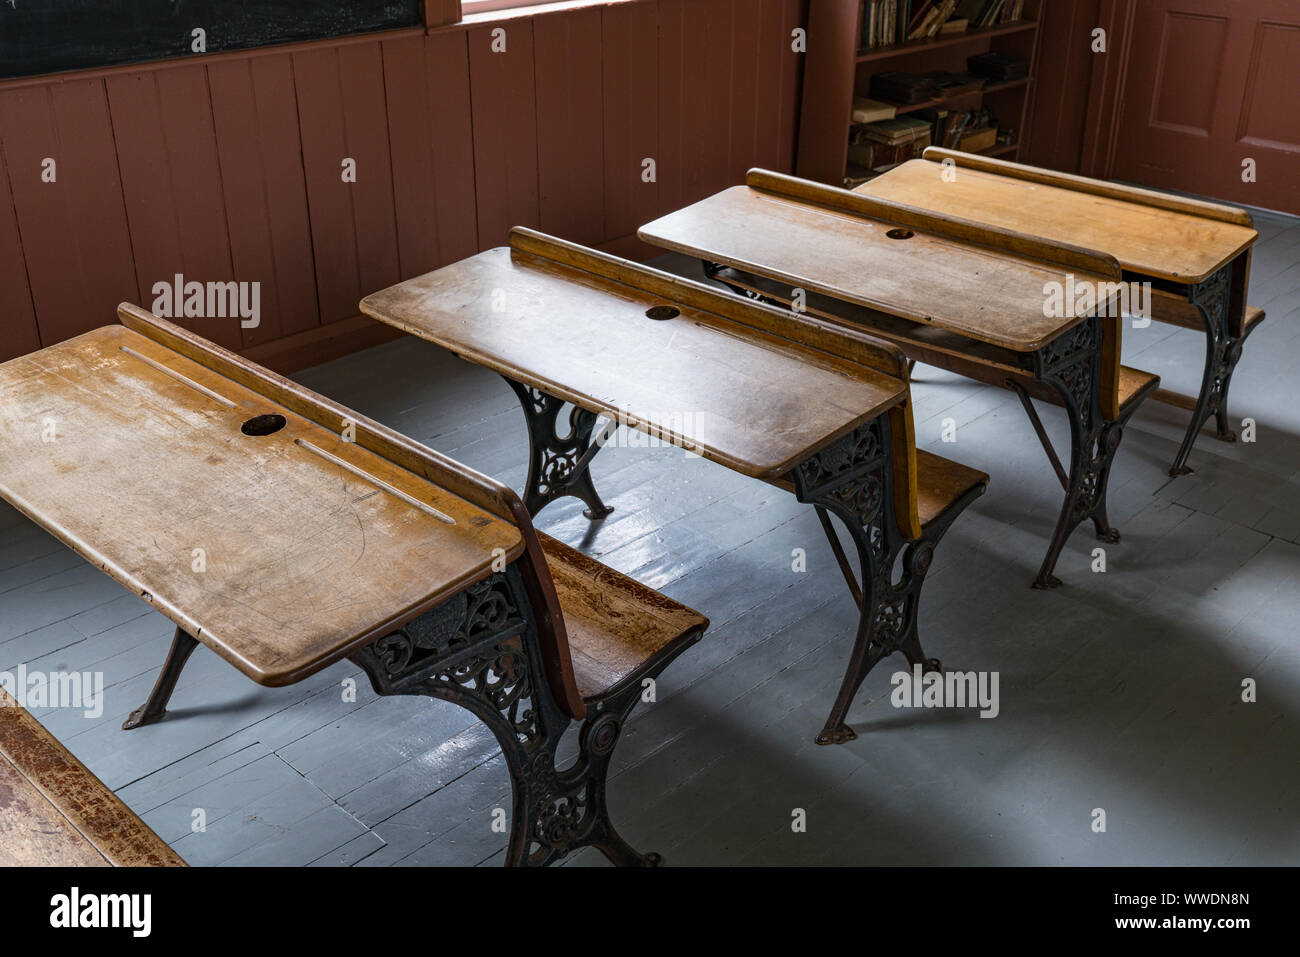 Desks lined up in an old one room school house Stock Photo